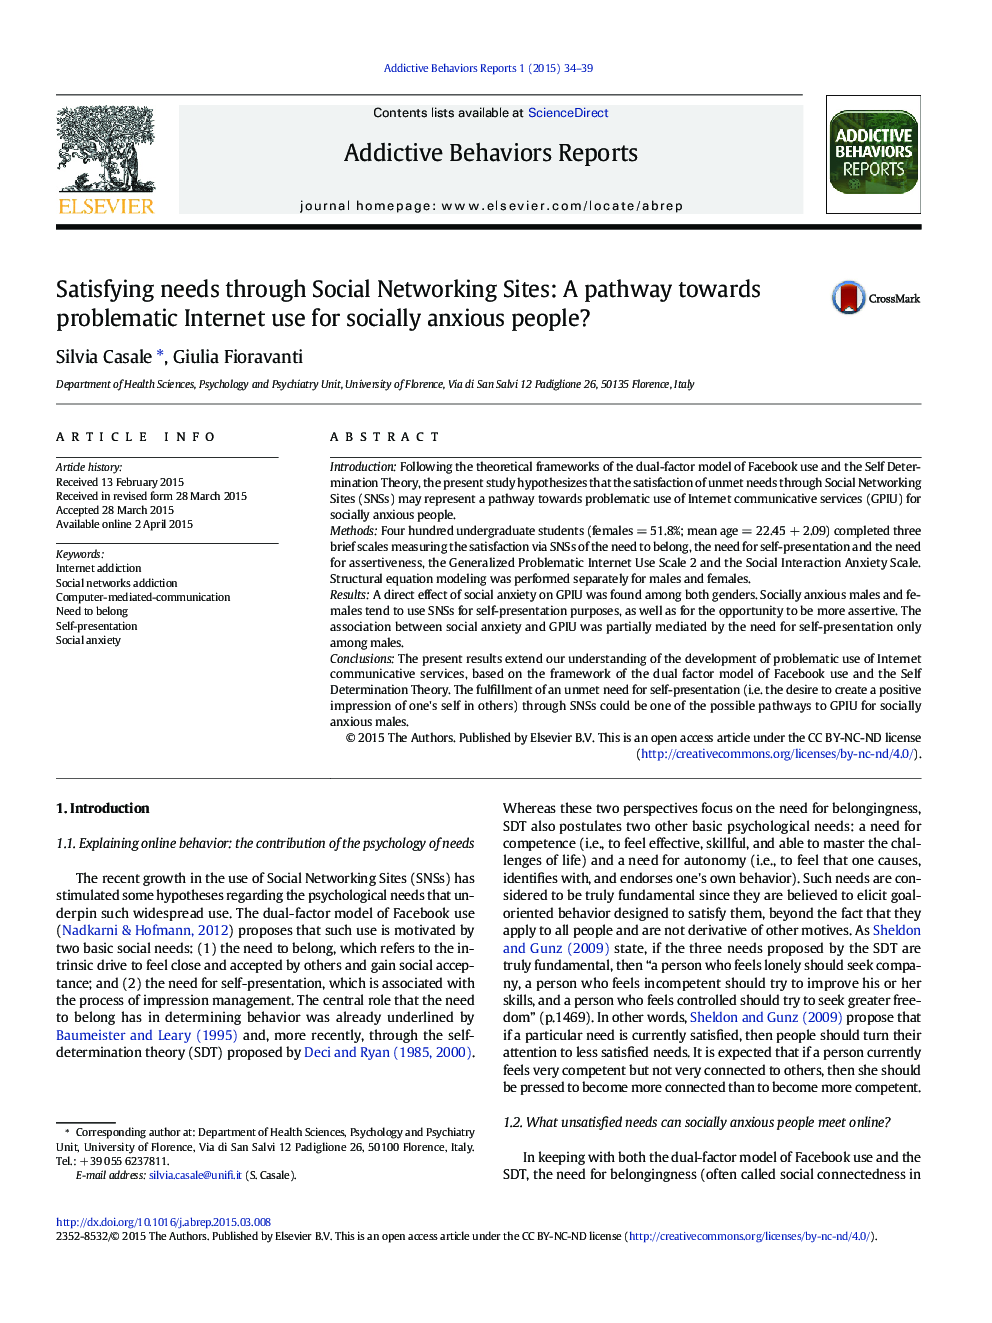 Satisfying needs through Social Networking Sites: A pathway towards problematic Internet use for socially anxious people?